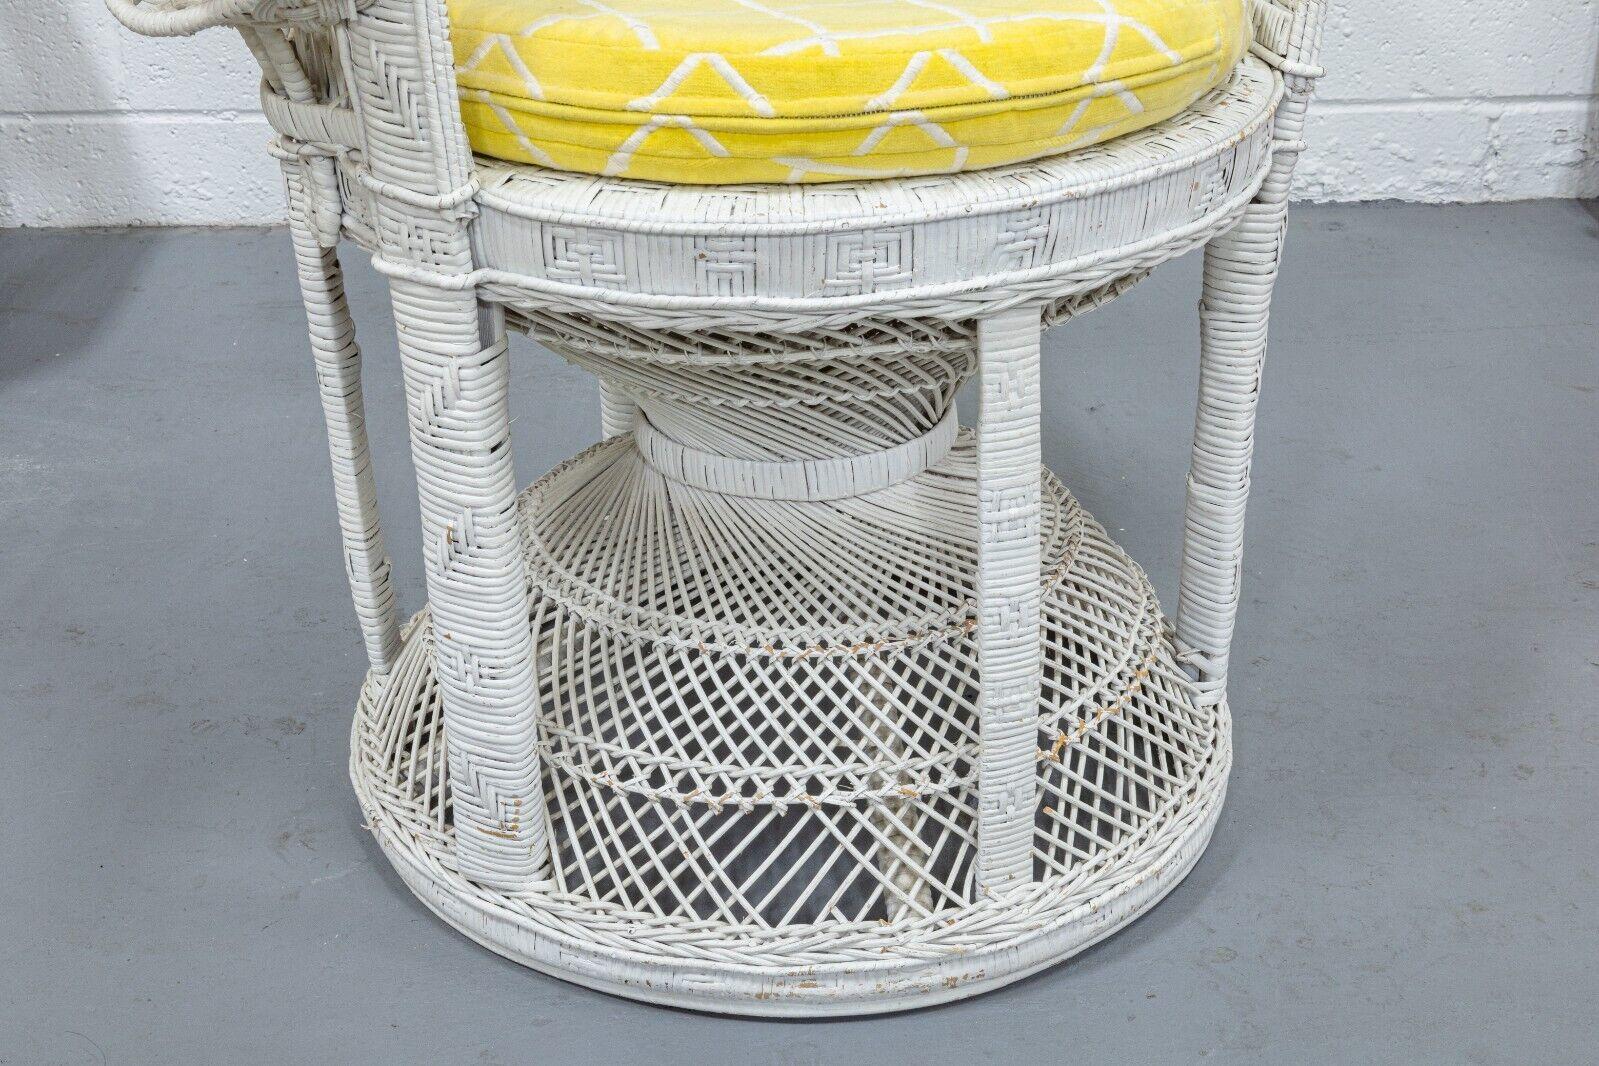 Vintage Emmanuel White Wicker Peacock Accent Chair with Yellow Seat Cushion 6